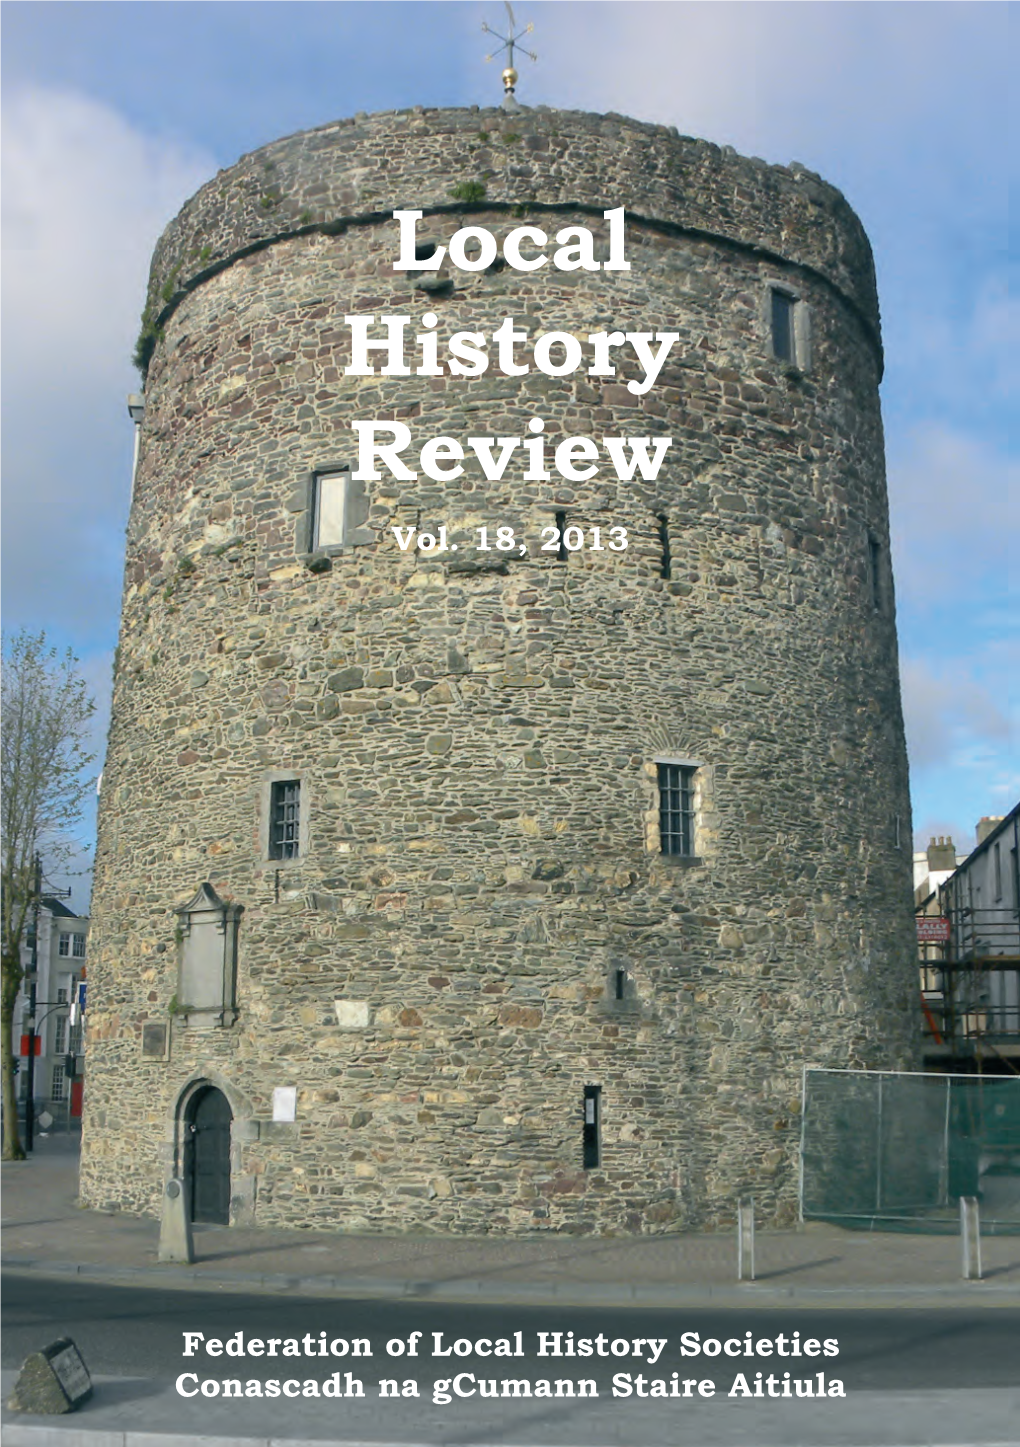 Local History Review Vol